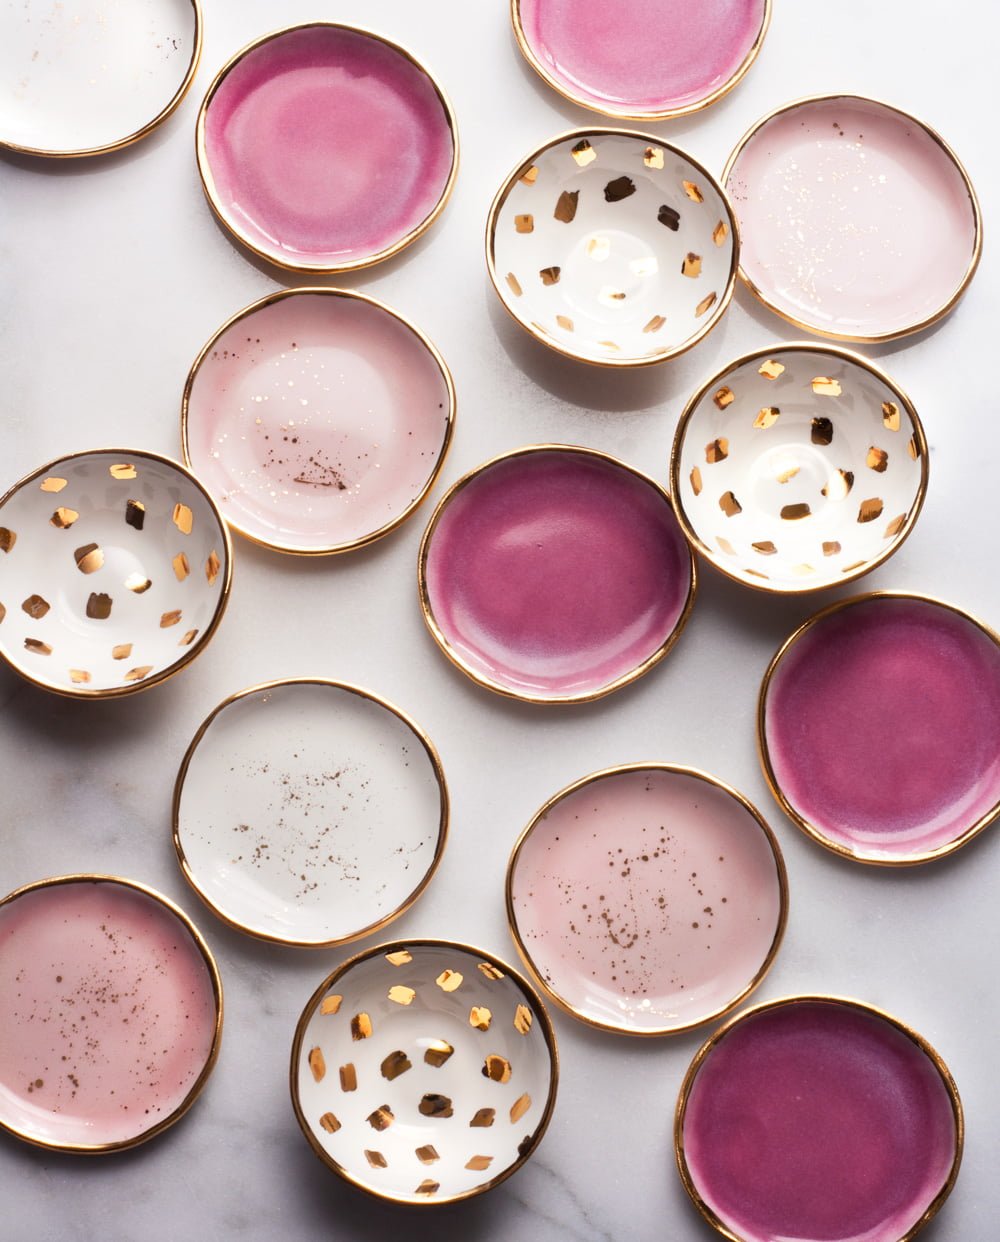 The Most Delicate Ceramics You Have Ever Seen-homesthetics (3)